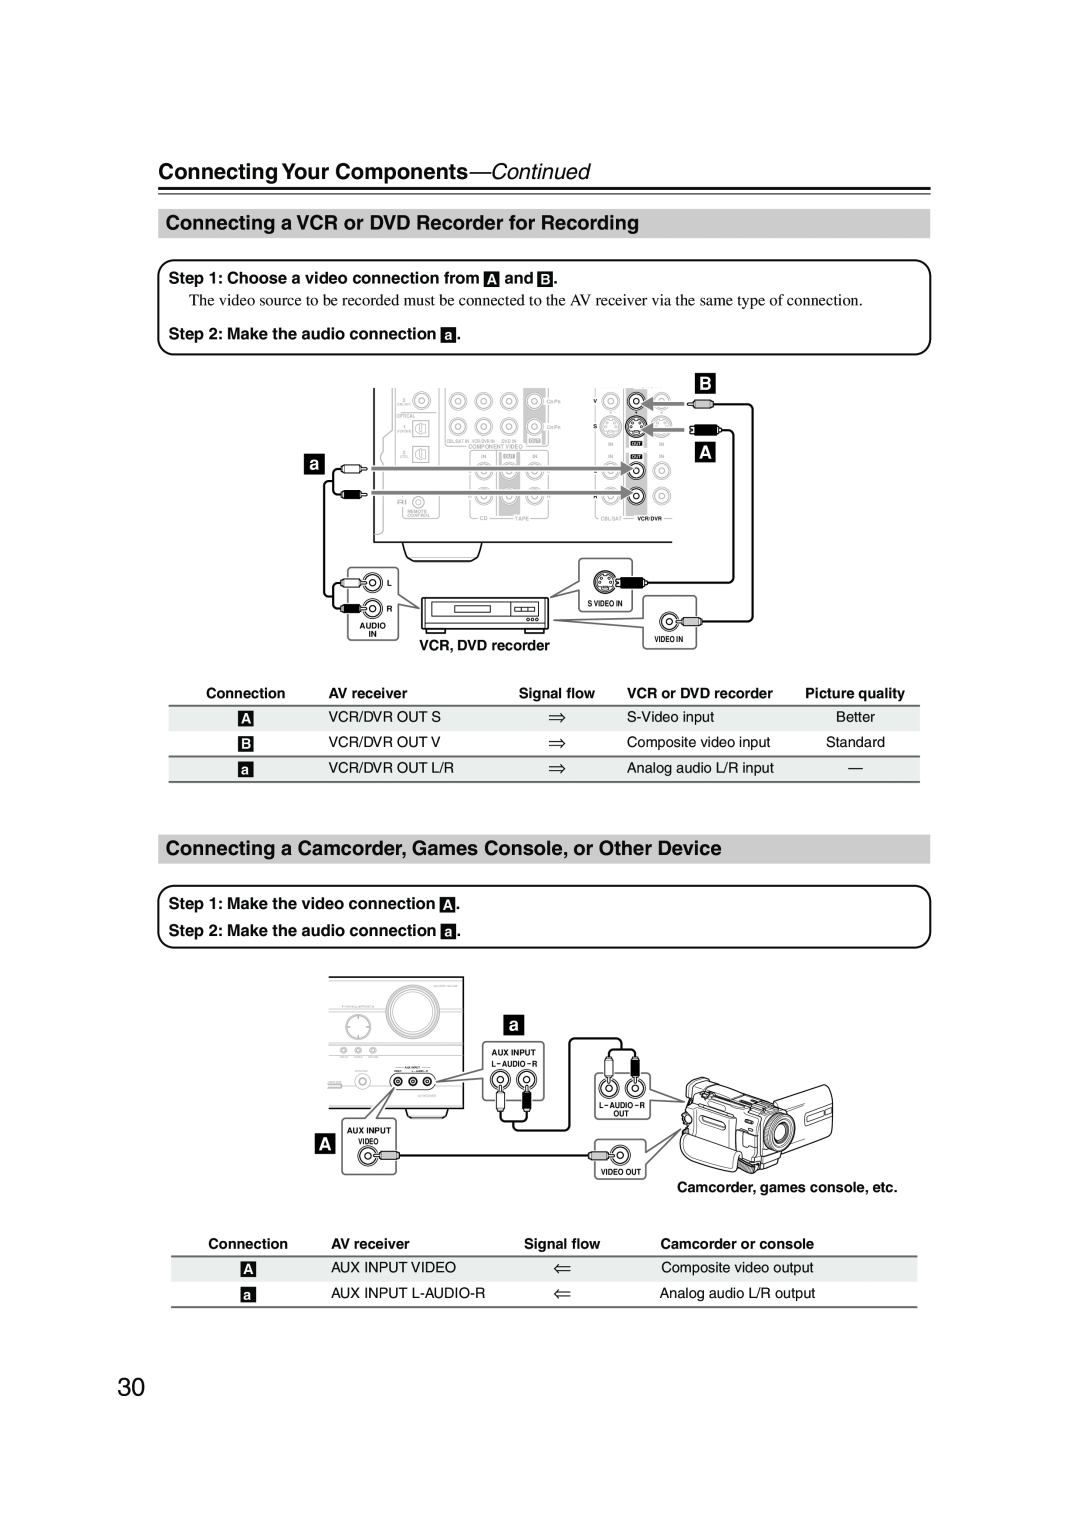 Onkyo HT-SP904 instruction manual Connecting a VCR or DVD Recorder for Recording, Connecting Your Components—Continued 